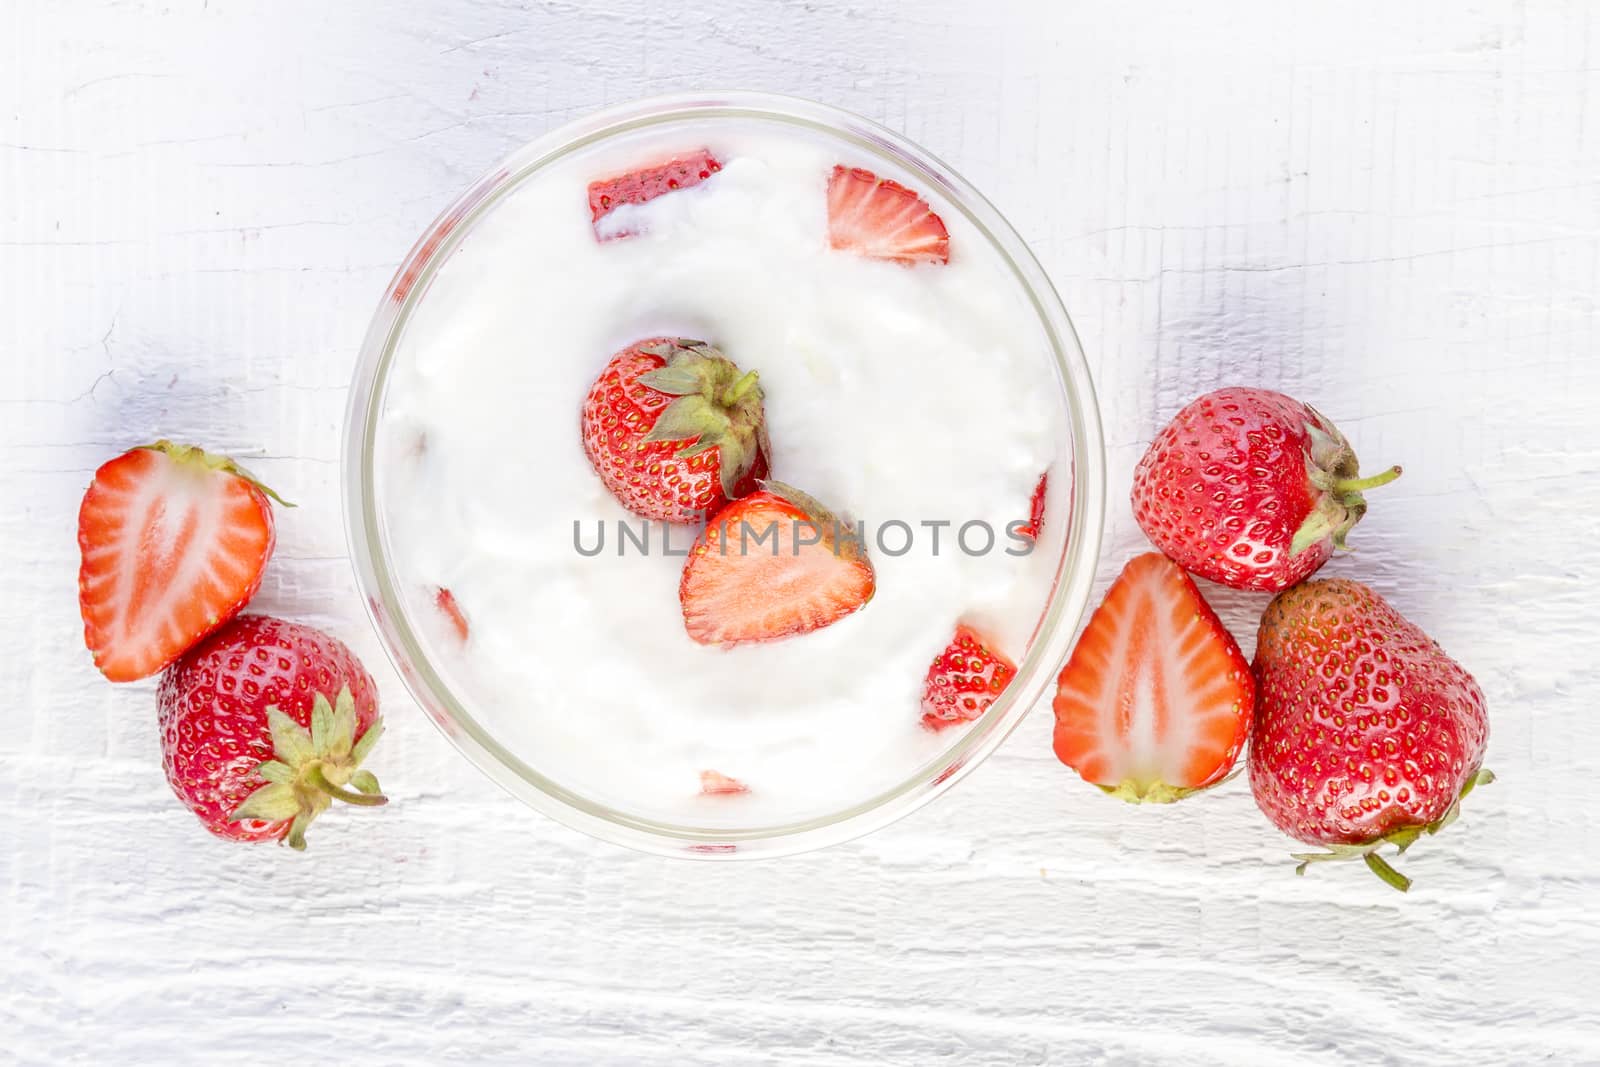 strawberry and yogurt in a wooden bowl on white wooden background